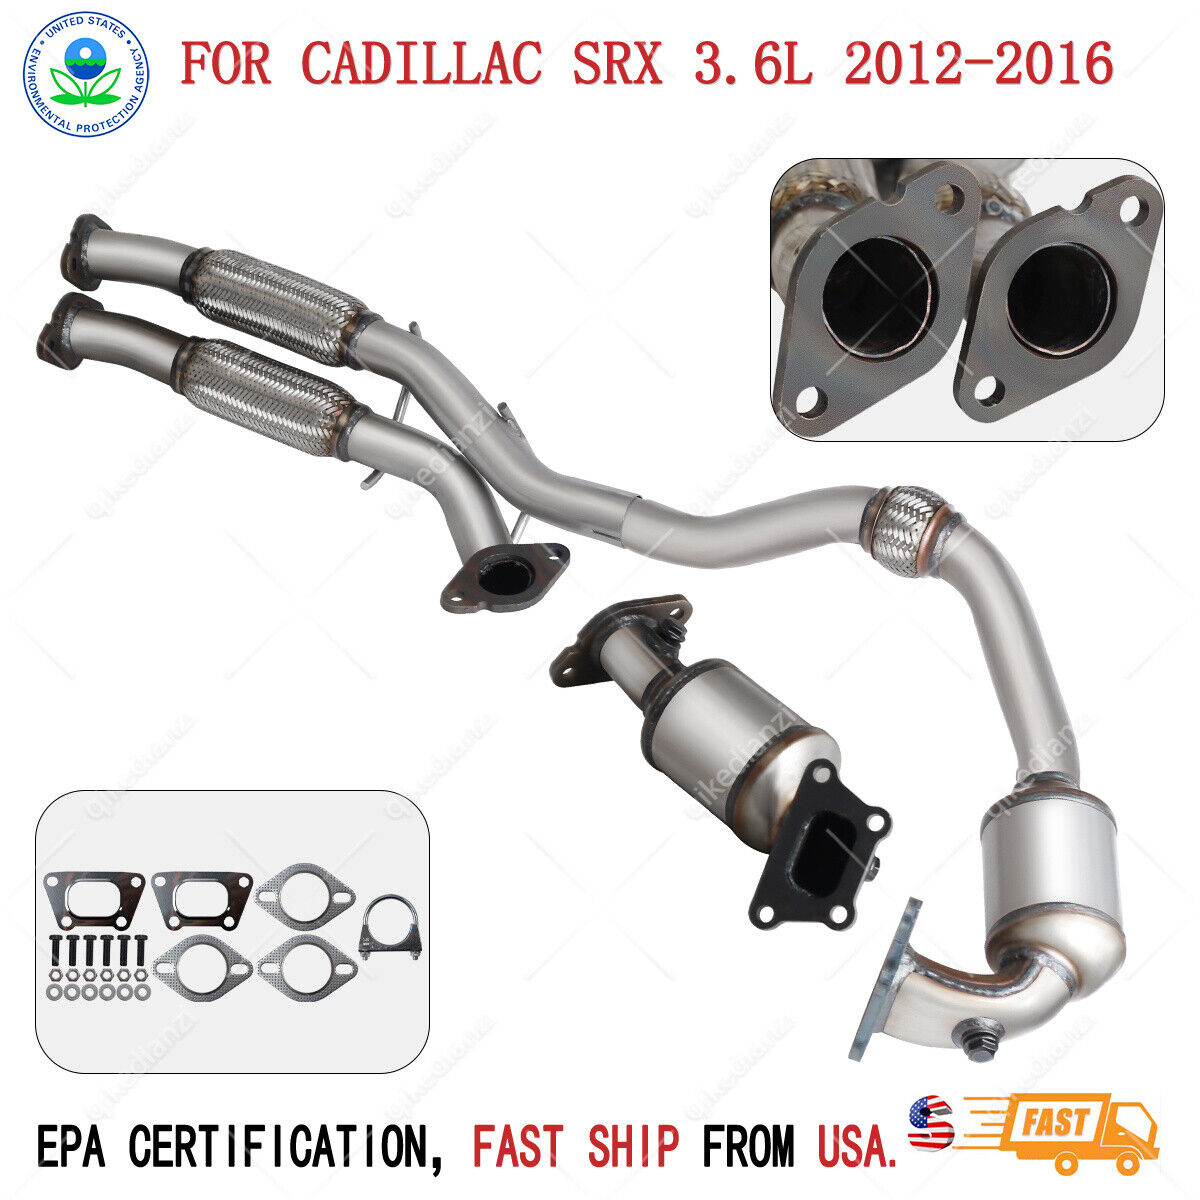 For Cadillac SRX 3.6L Exhaust Catalytic Converter 2012 2013 2014 2015 2016 Cat